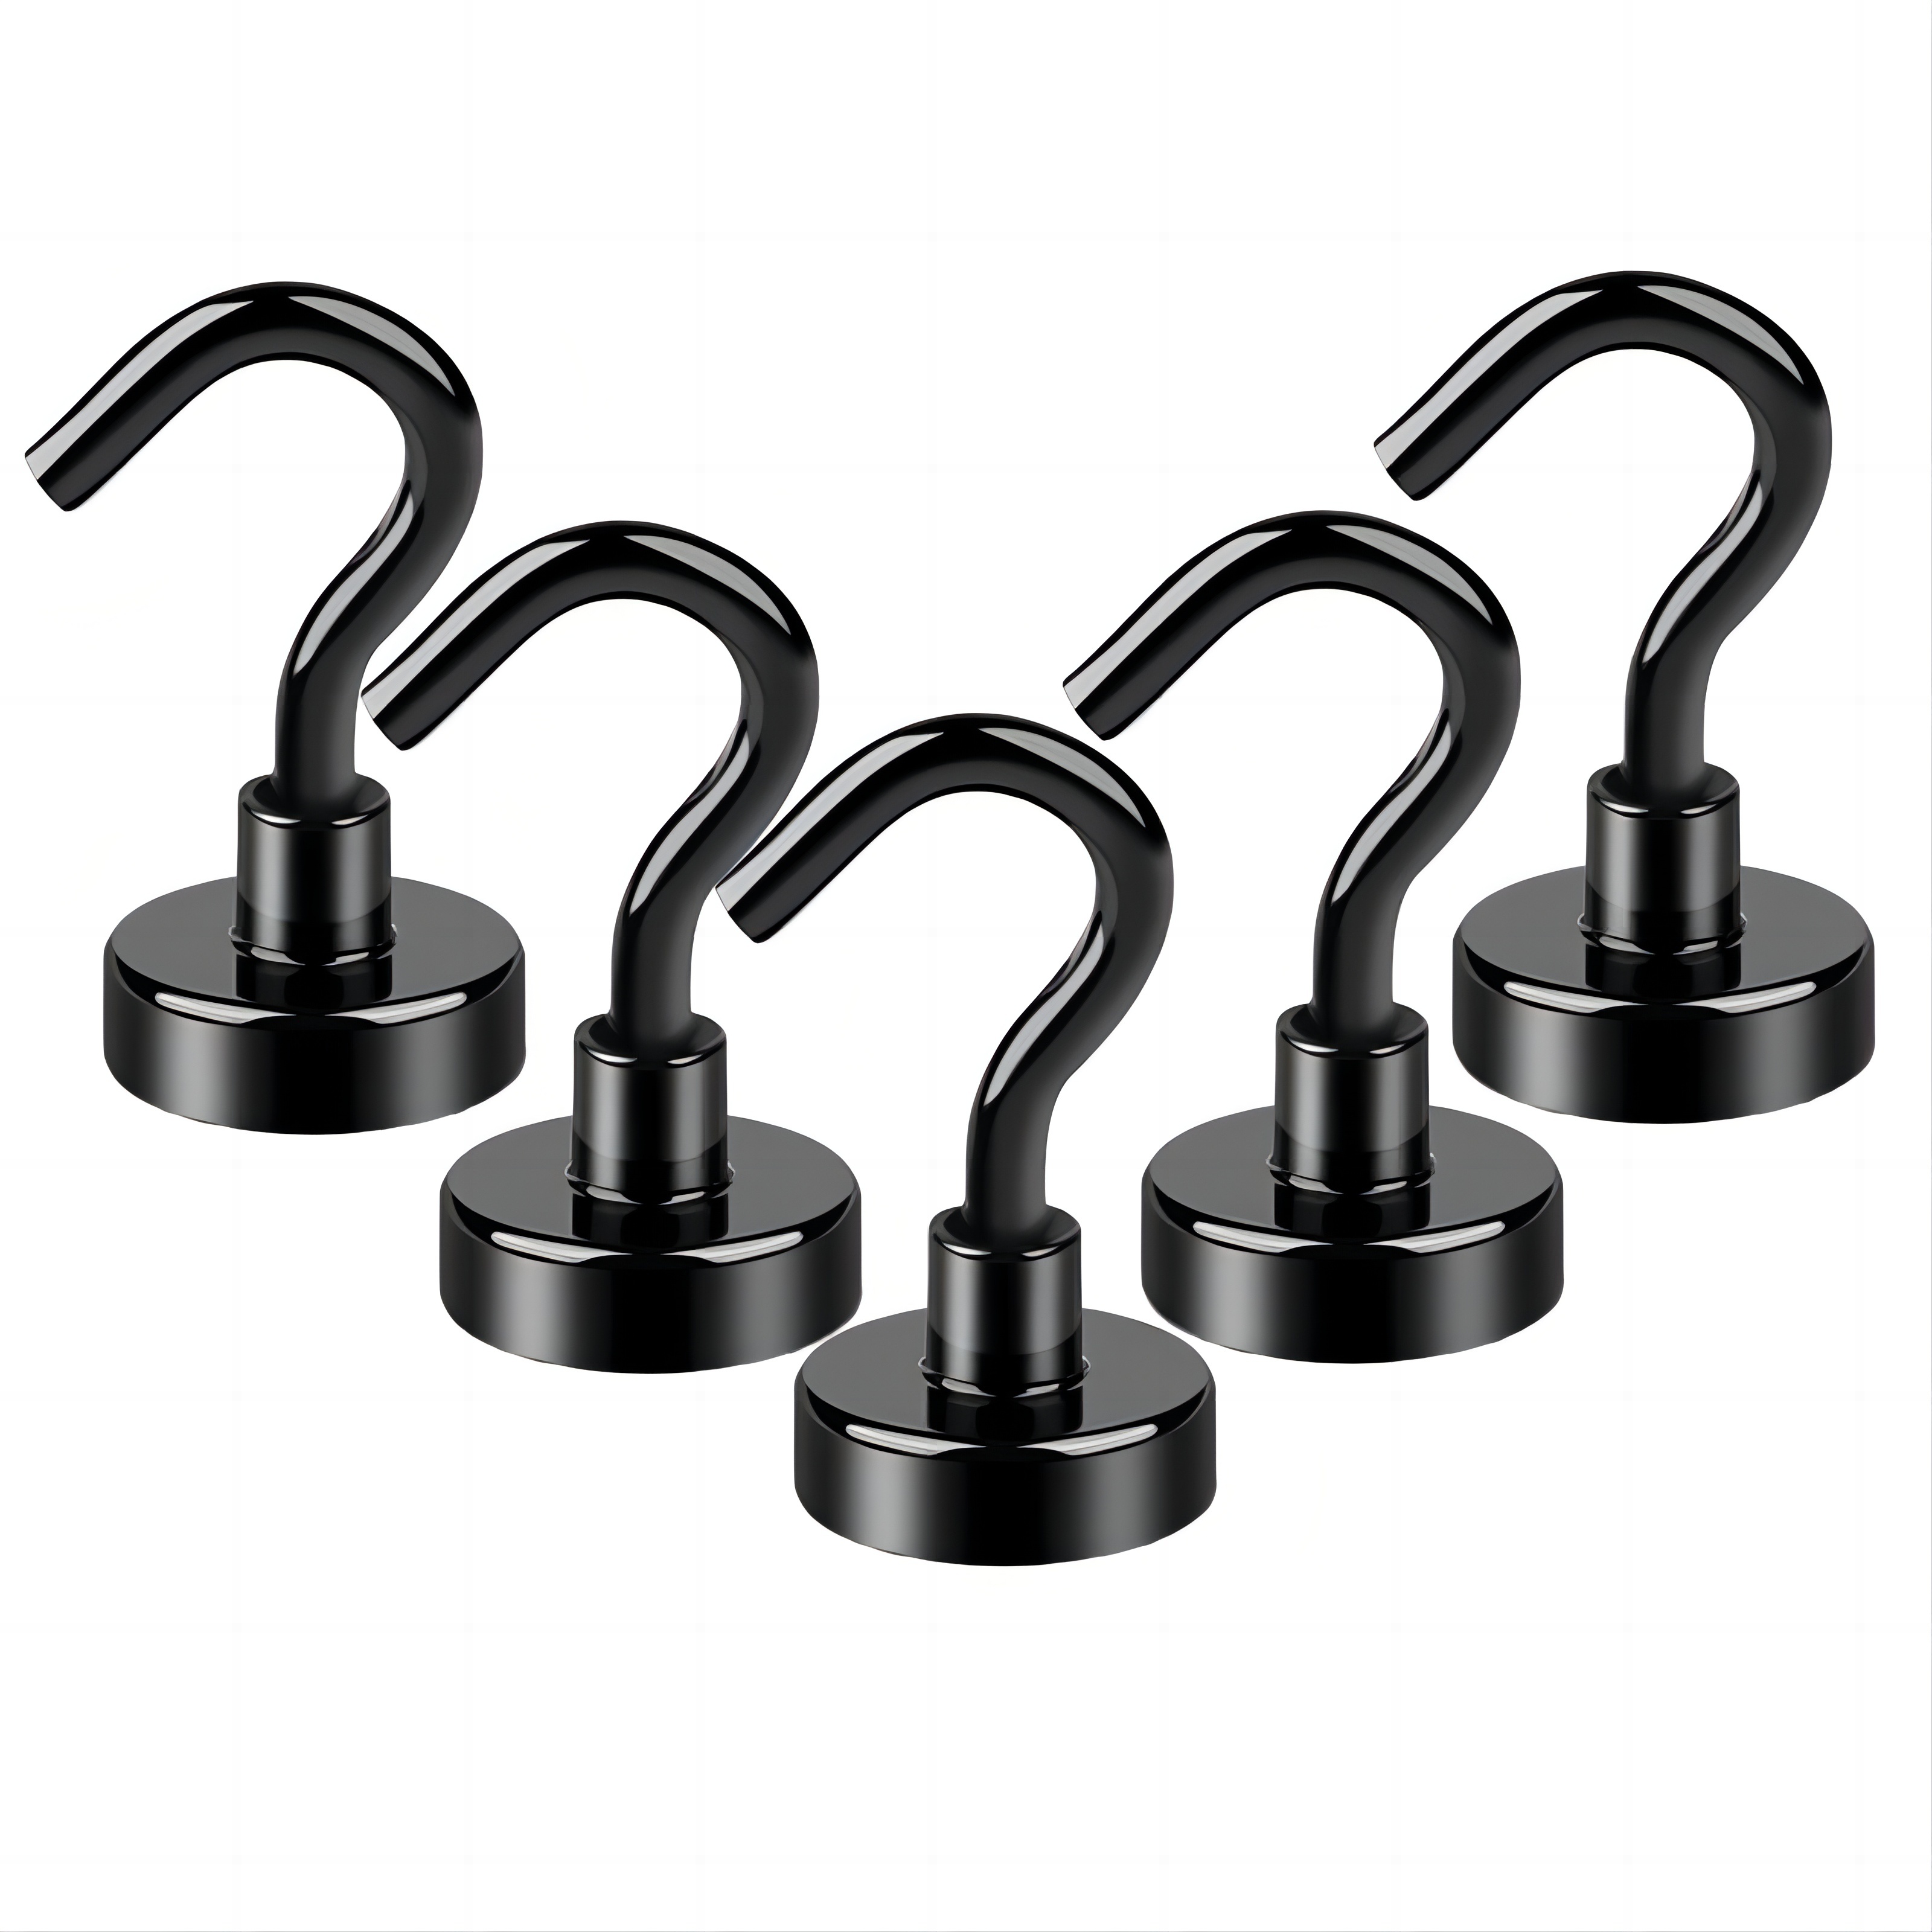 

5pcs Magnetic Hook, 50lbs Strong Heavy-duty Cruise Magnet S-shaped Hook, Suitable For Refrigerators, Suspensions, Cabins, Barbecues, Kitchens, Garages, Workplaces, And Offices.